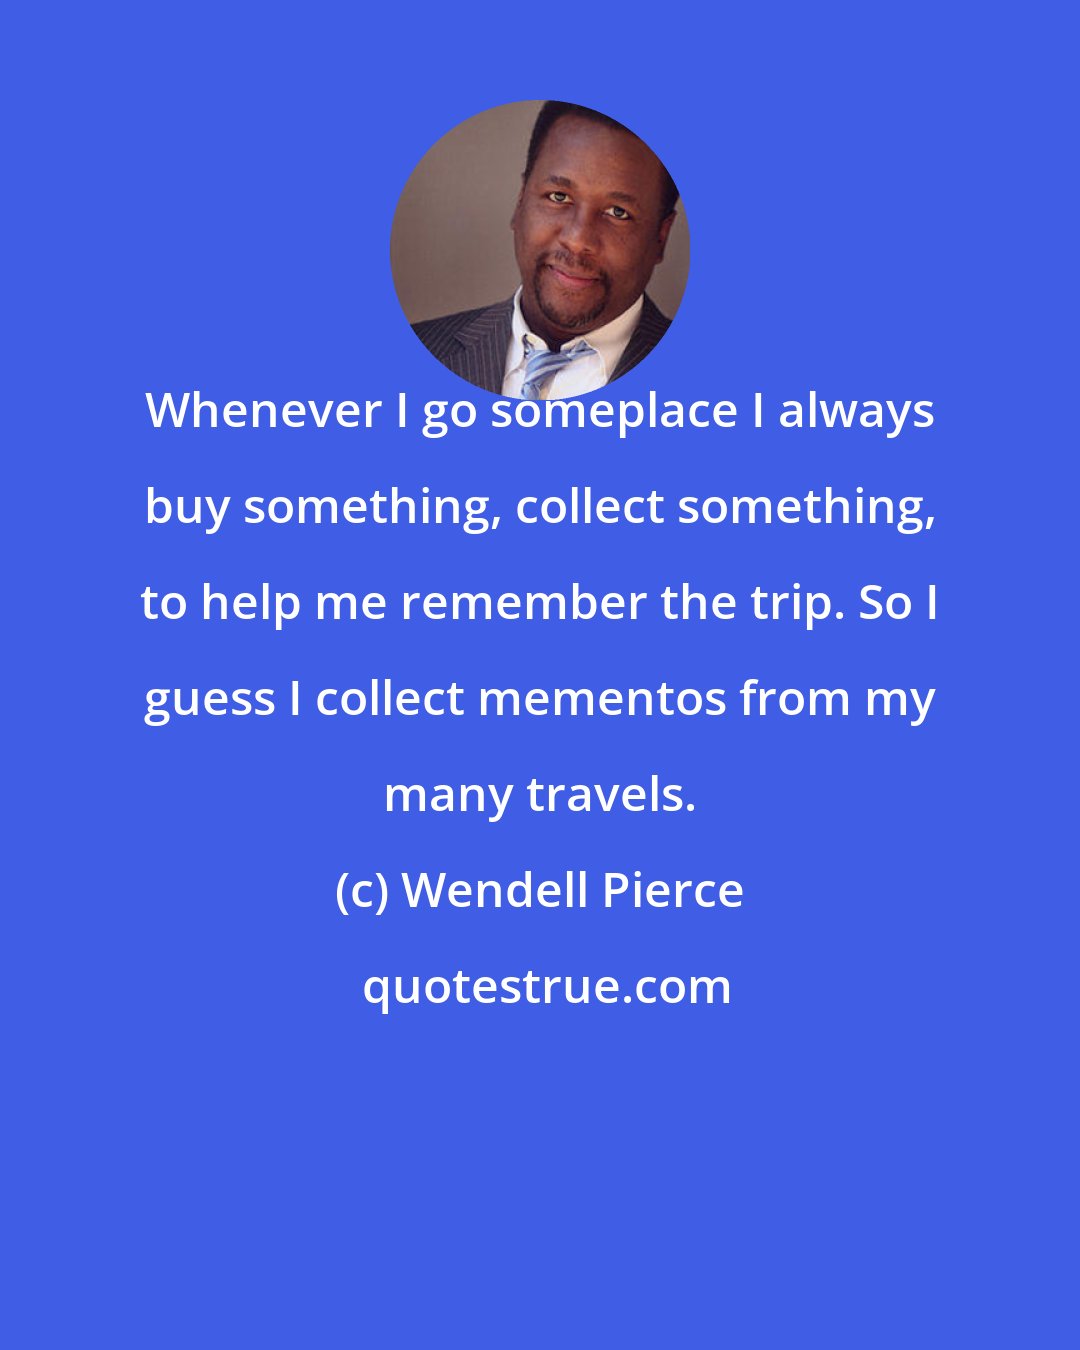 Wendell Pierce: Whenever I go someplace I always buy something, collect something, to help me remember the trip. So I guess I collect mementos from my many travels.